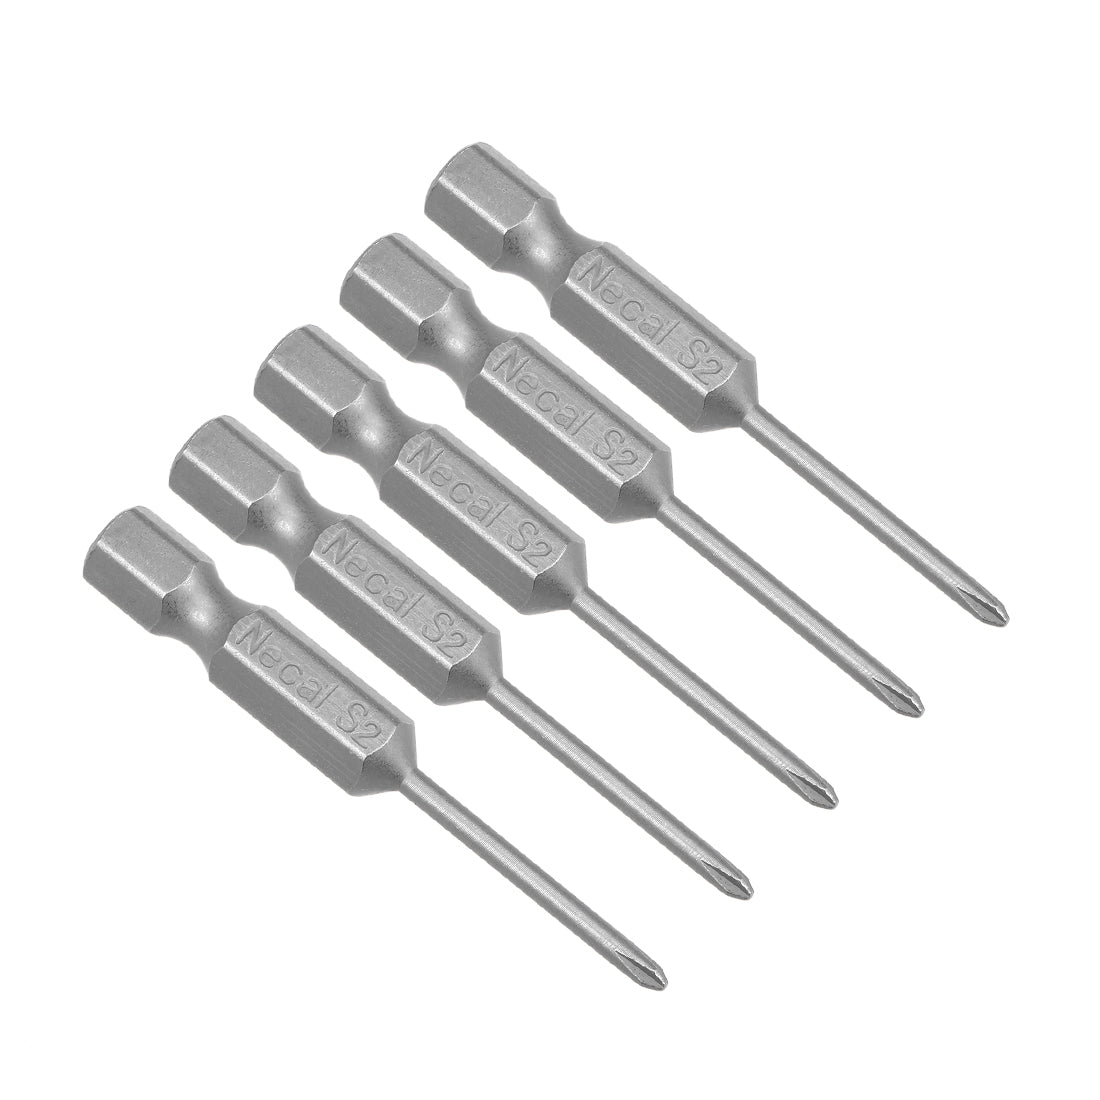 uxcell Uxcell 5 Pcs Magnetic Phillips Screwdriver Bits, Hex Shank S2 Power Tool